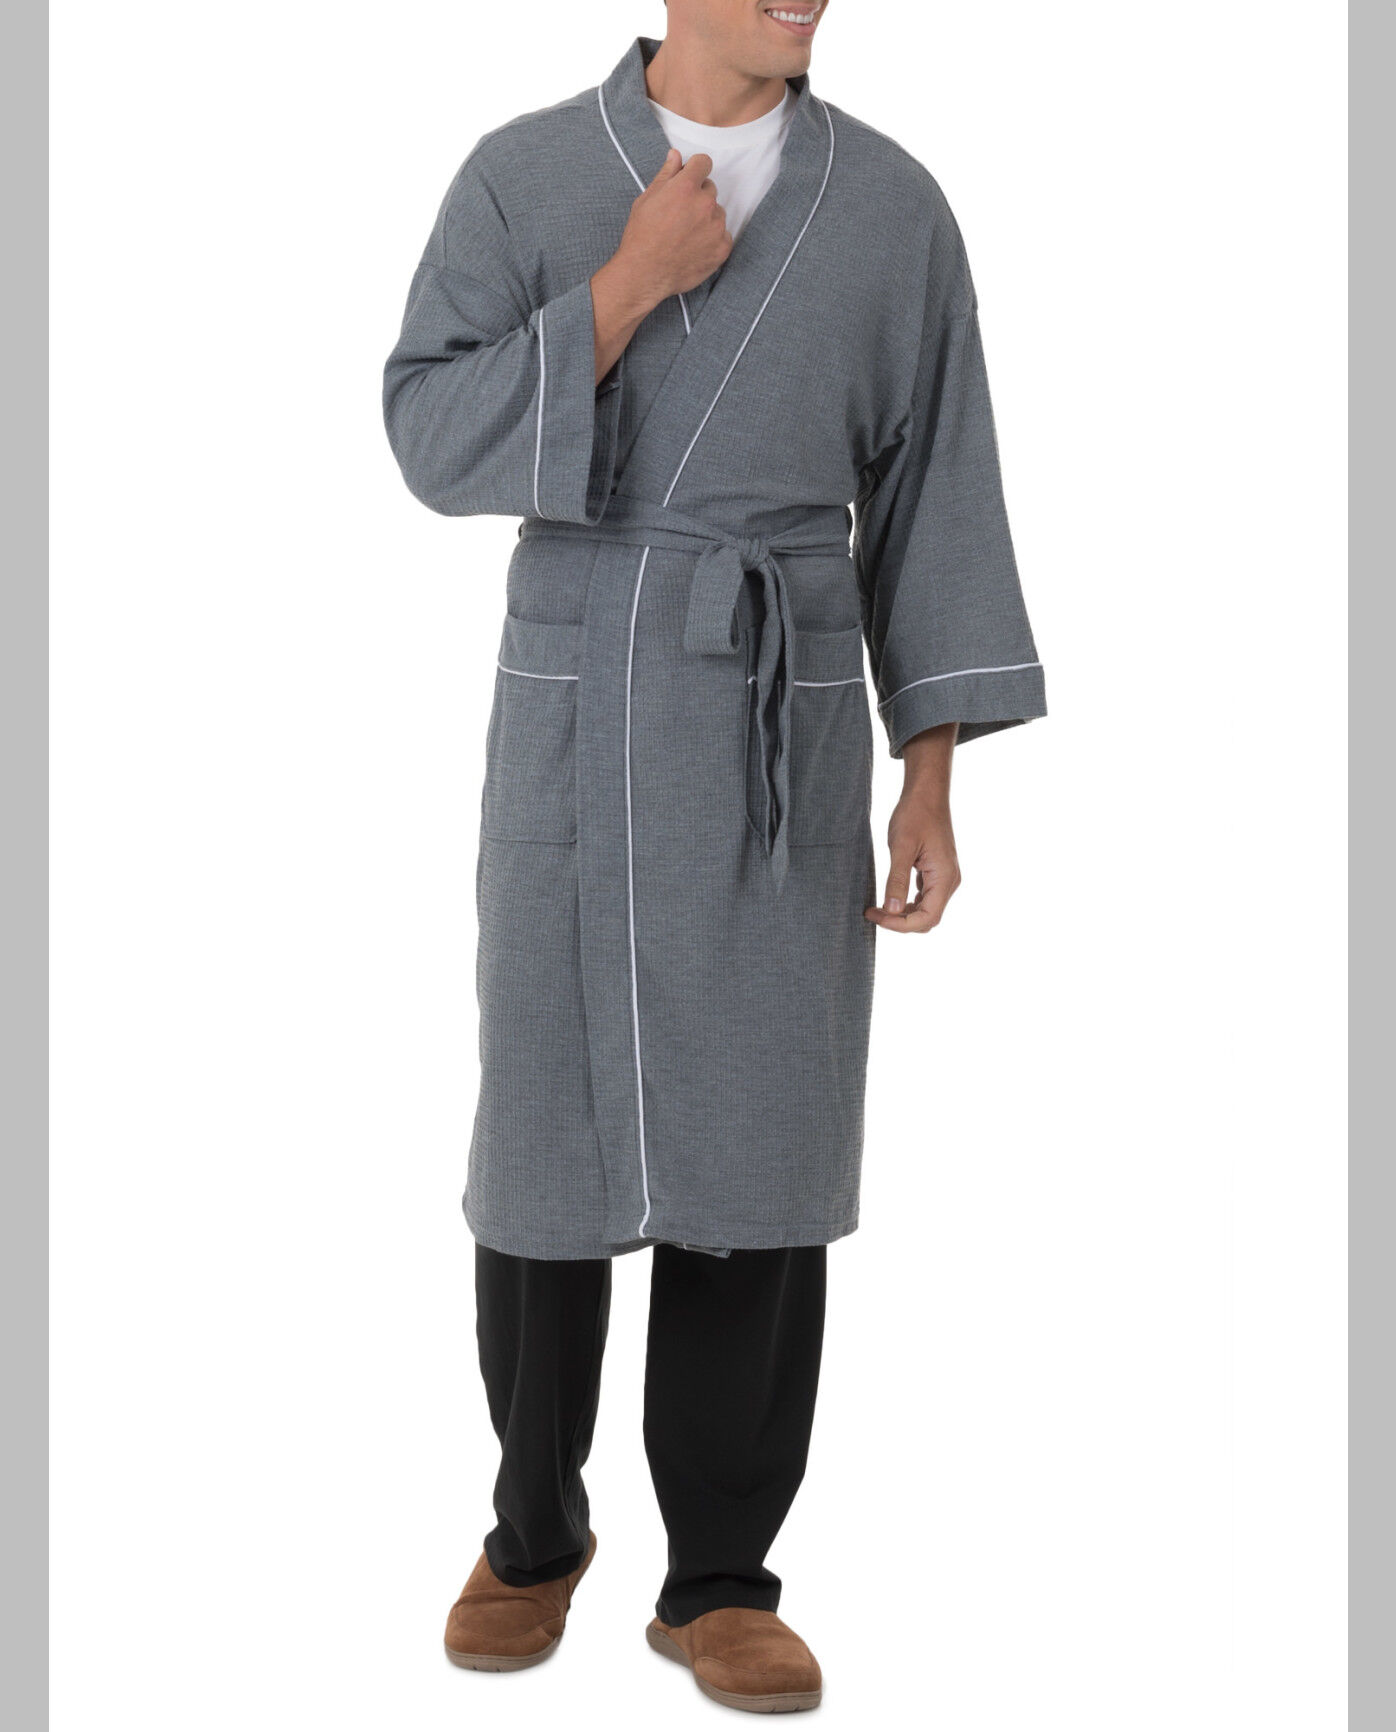 Men's Soft Touch Waffle Robe, 1 Pack, Size 2XL GREY